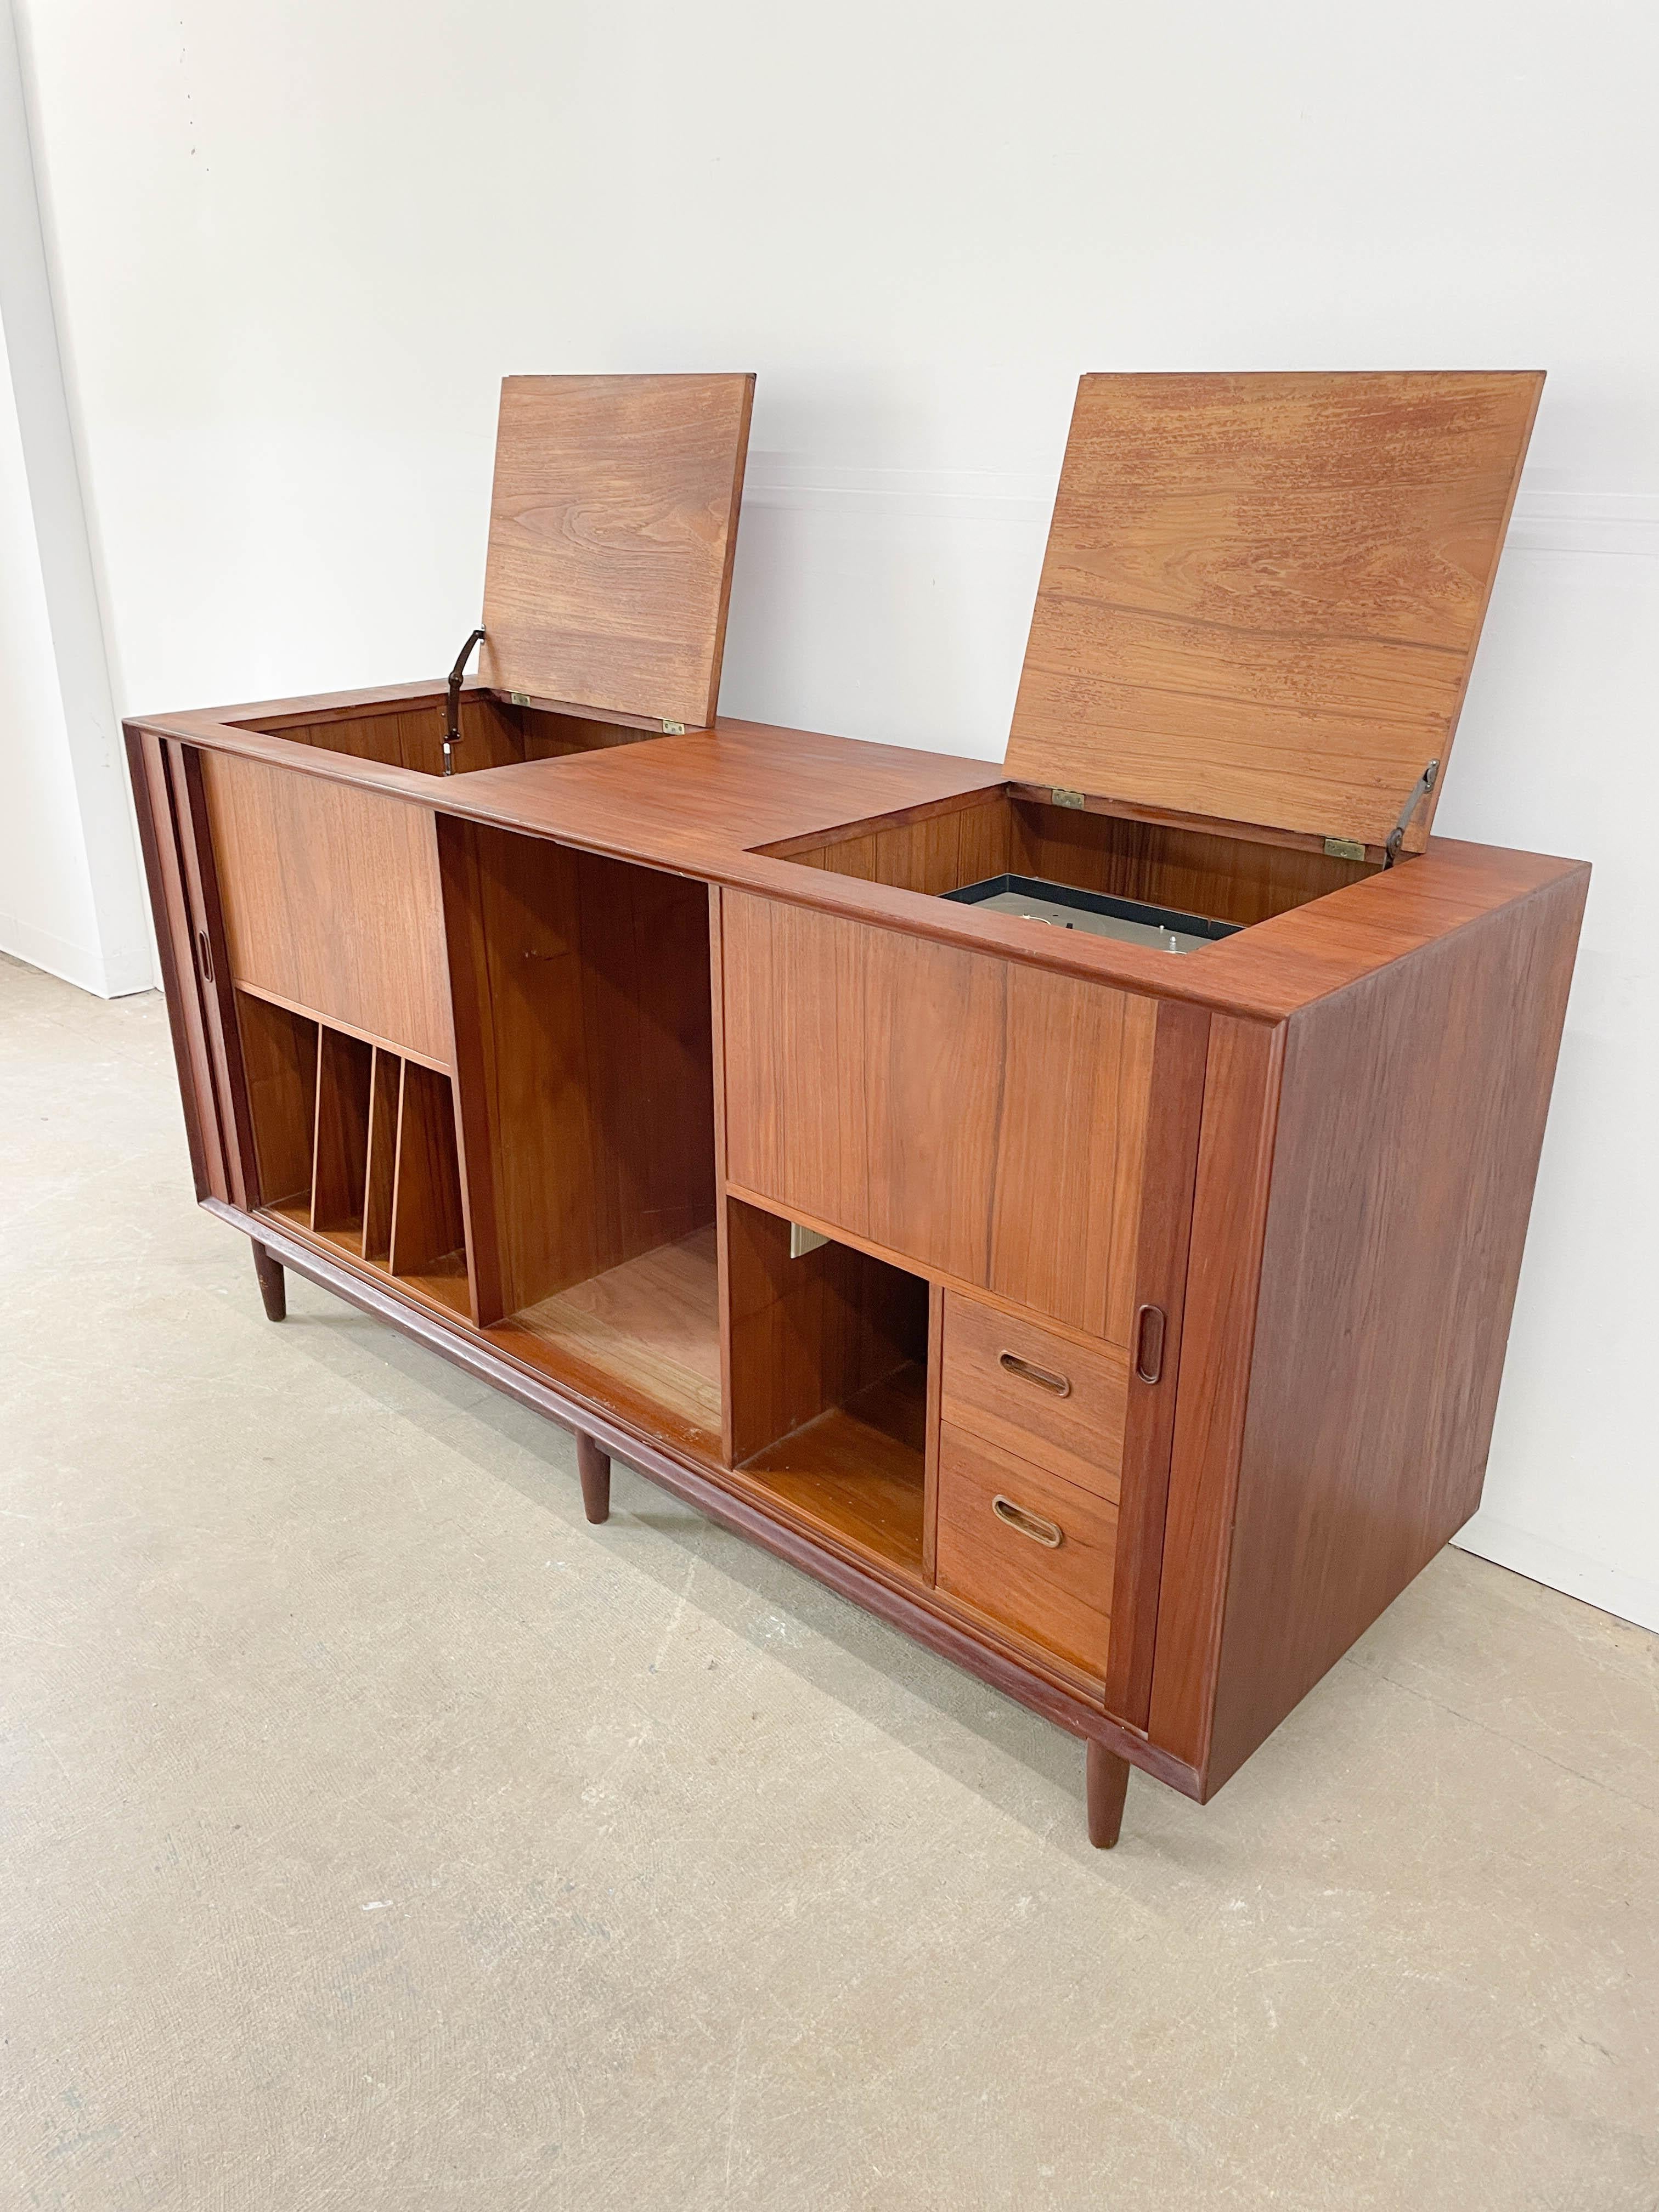 A rare and imposing Hi-Fi cabinet from the 1950s by famed Danish designer, Arne Vodder. Made by Sibast Furniture, this cleverly designed cabinet provides Hi-Fi component and record storage in one great looking cabinet. With convenient waist high